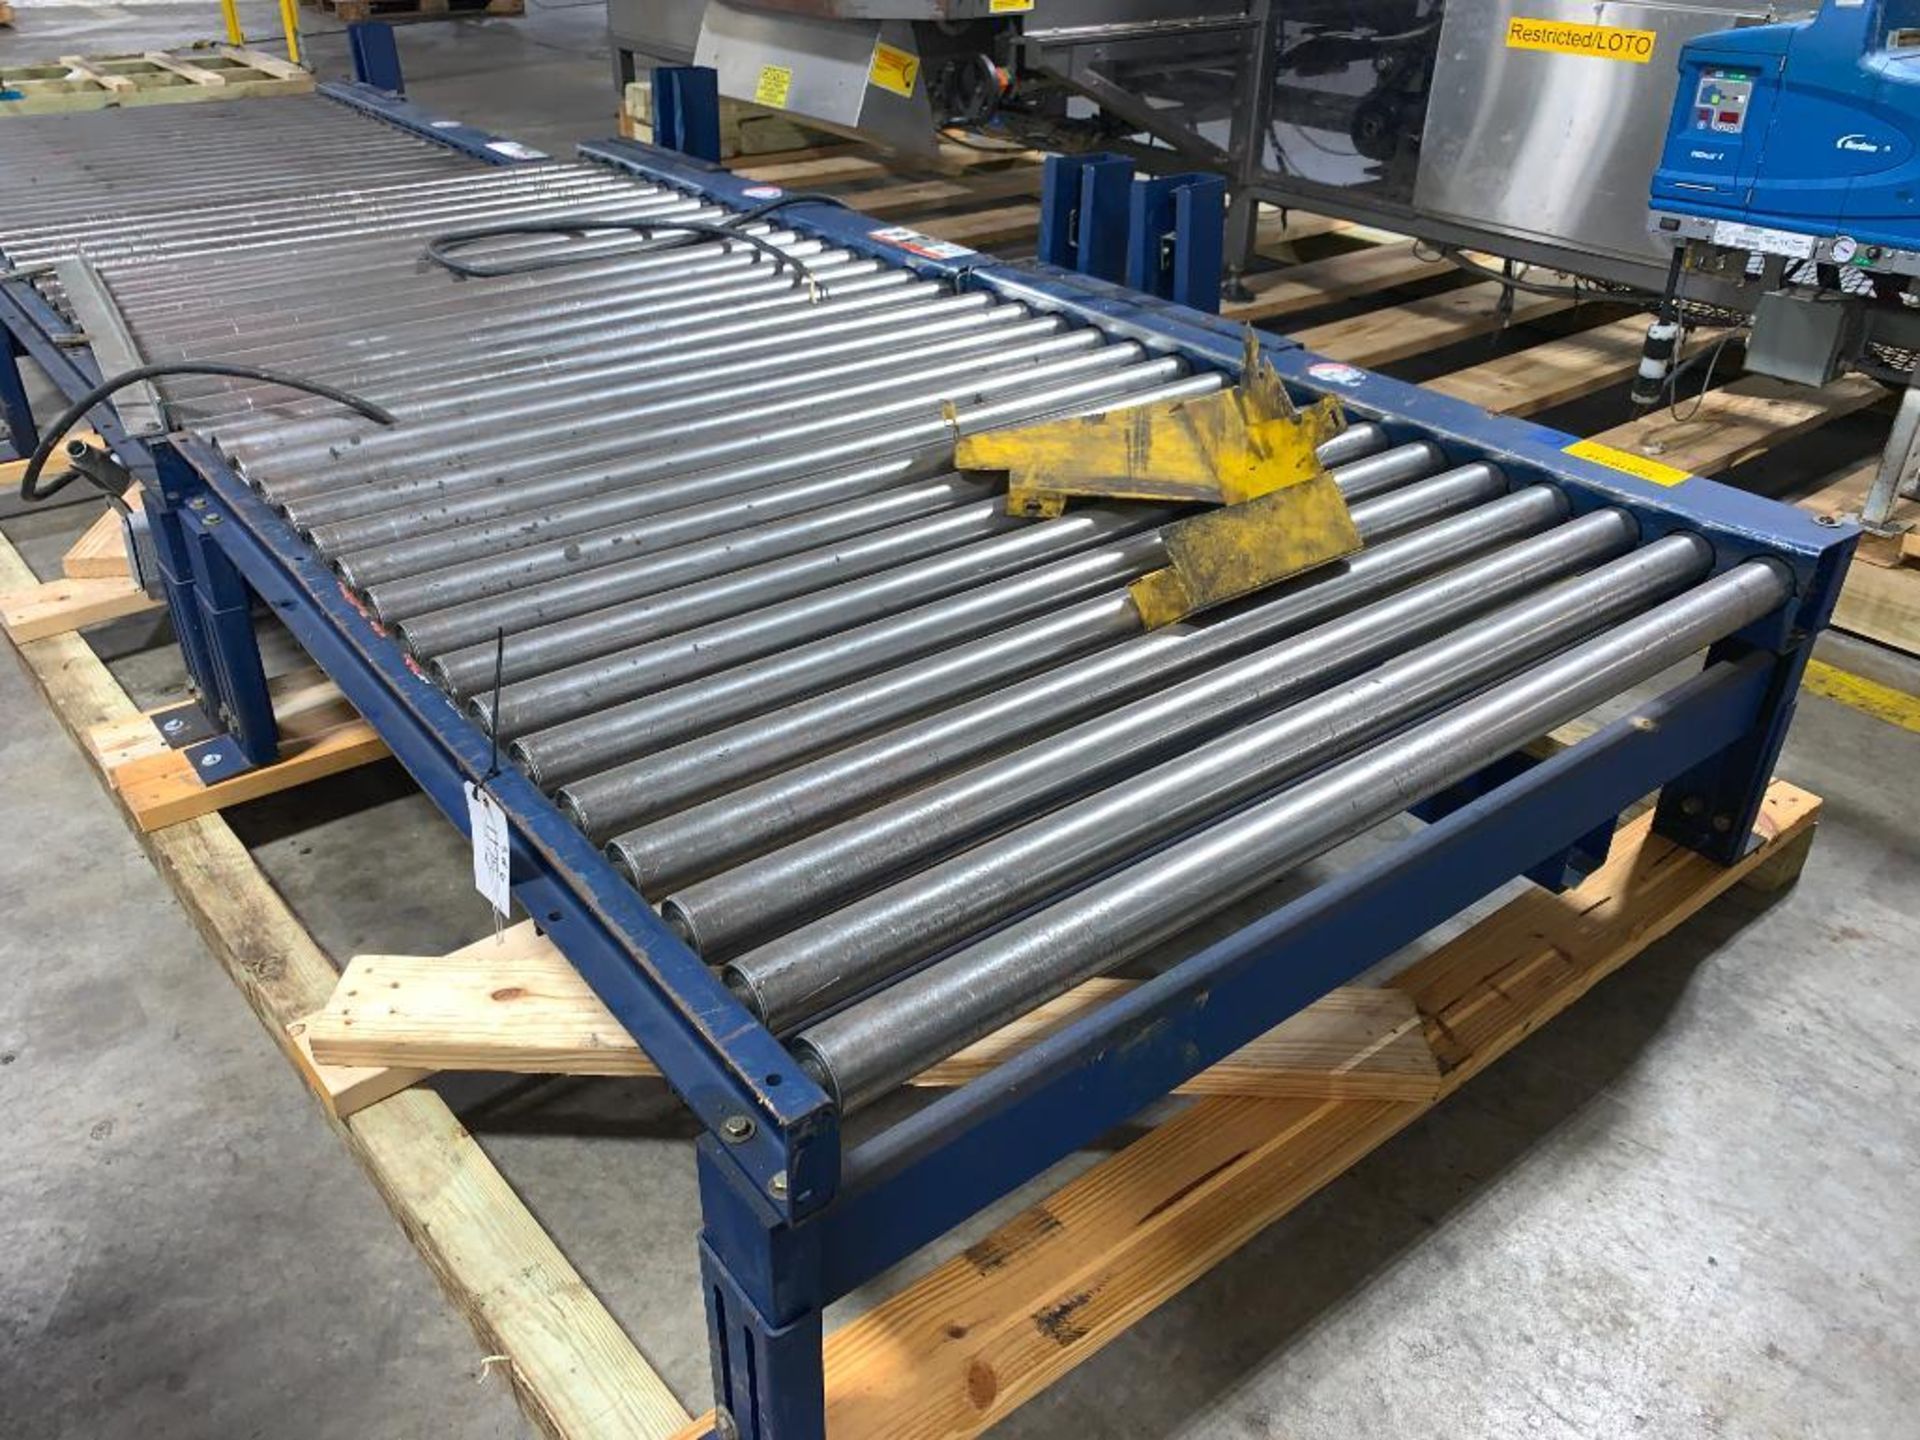 (6) skids of Lantech full pallet conveyor including turntable section - Located in Tifton, GA - Image 15 of 19